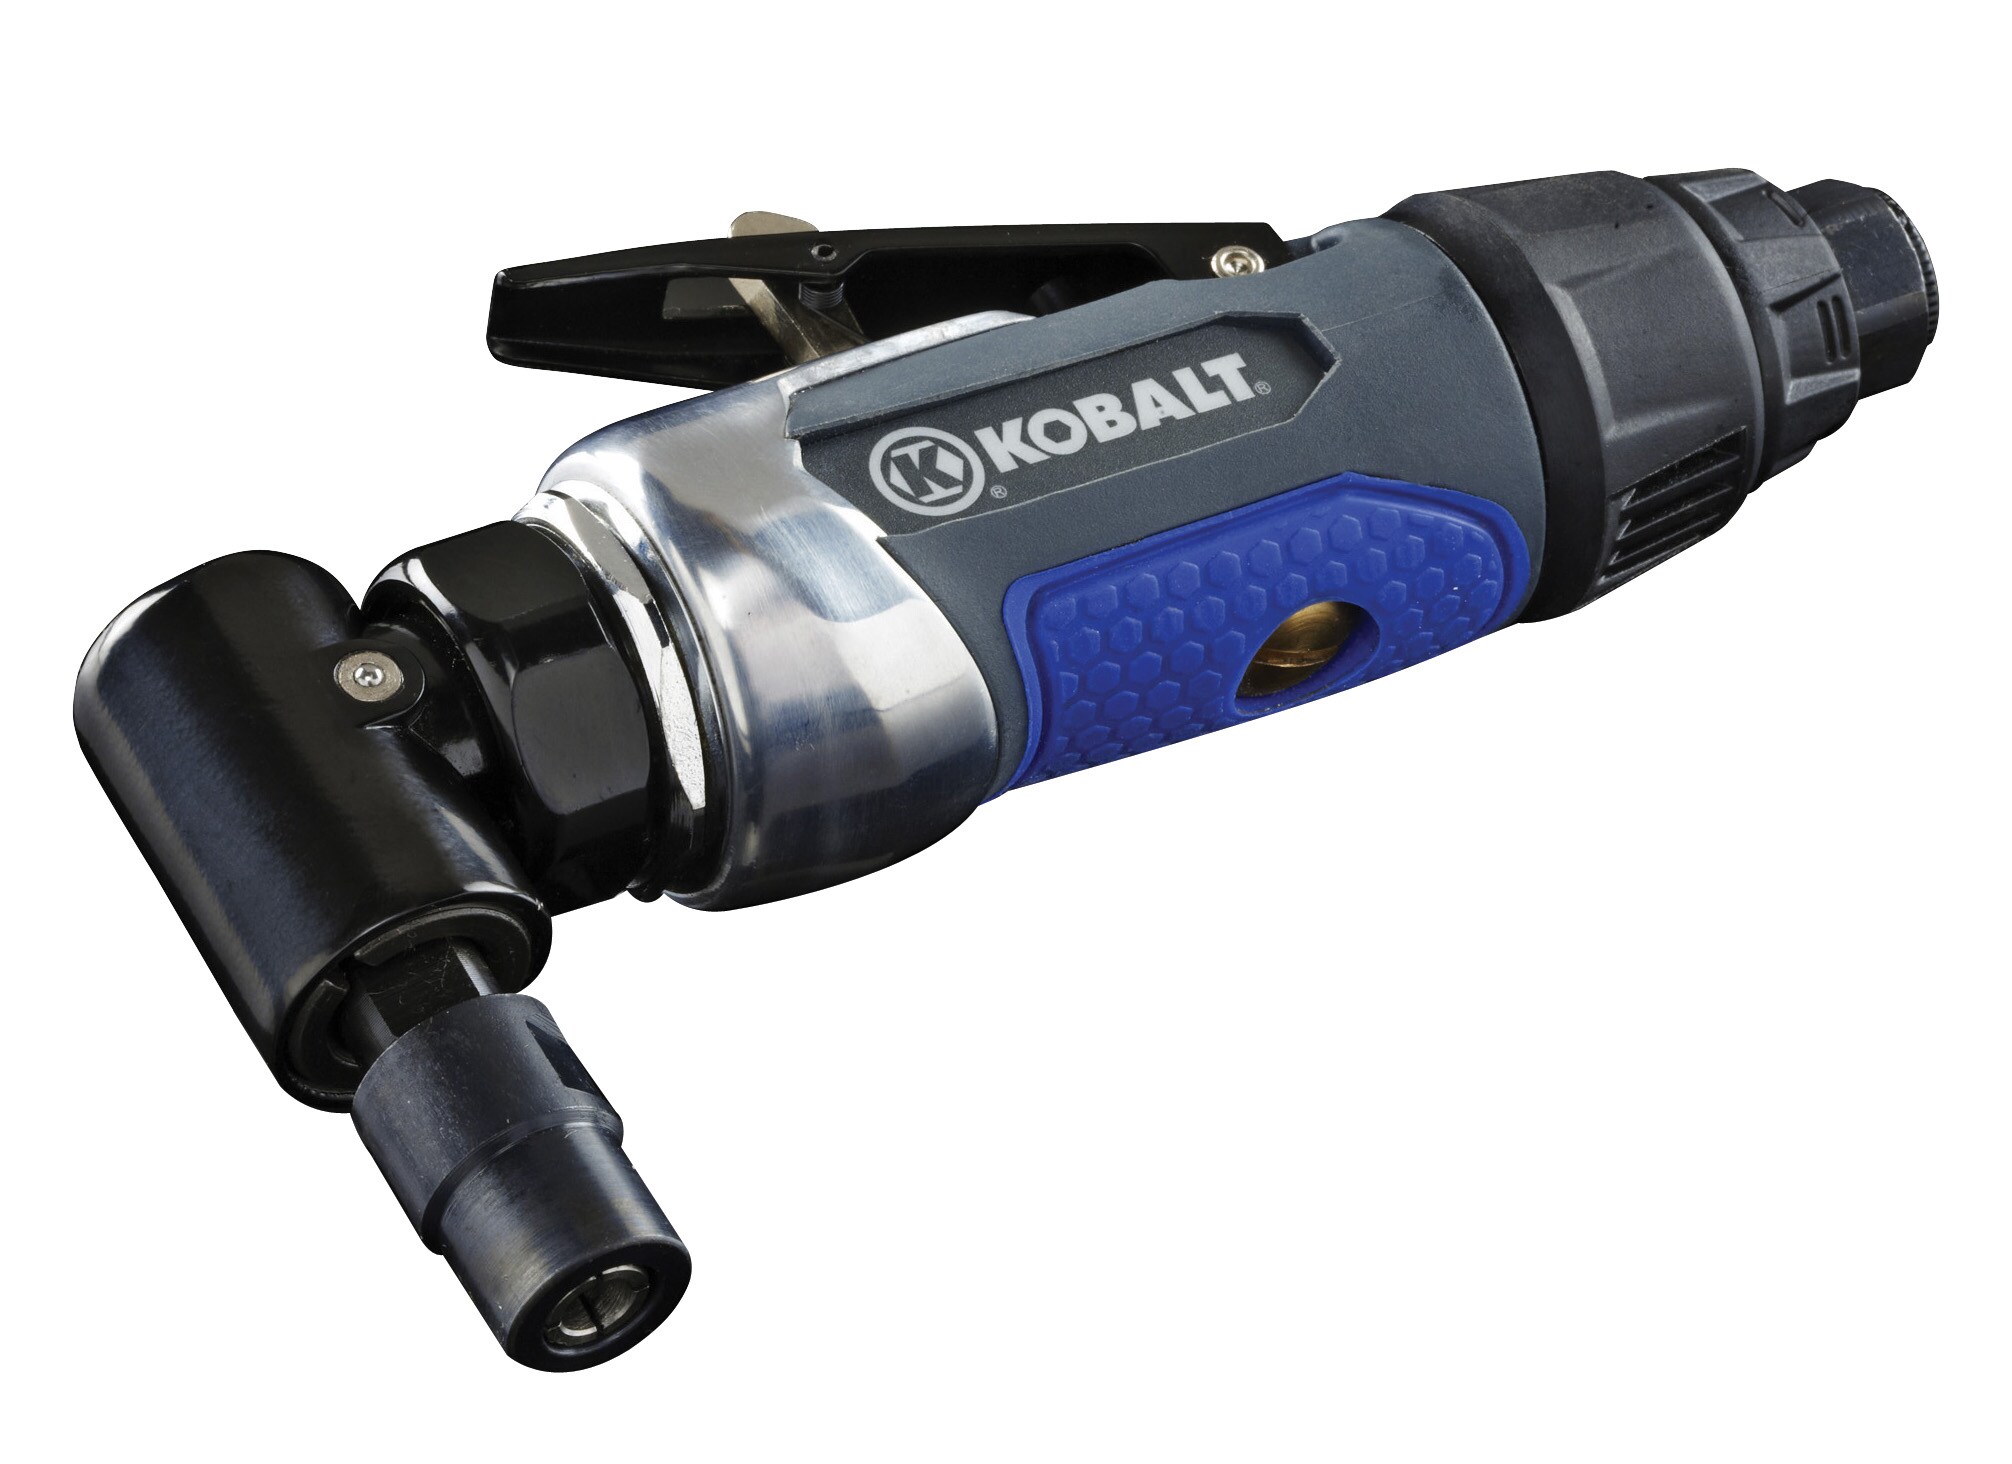 Air Angle Die Grinder with 1/4 and 1/8 Collets Air Compressor Tool Air Right Angle Die Grinder 20000 RPM Free Speed and 2 Wrenches Pneumatic Tools 